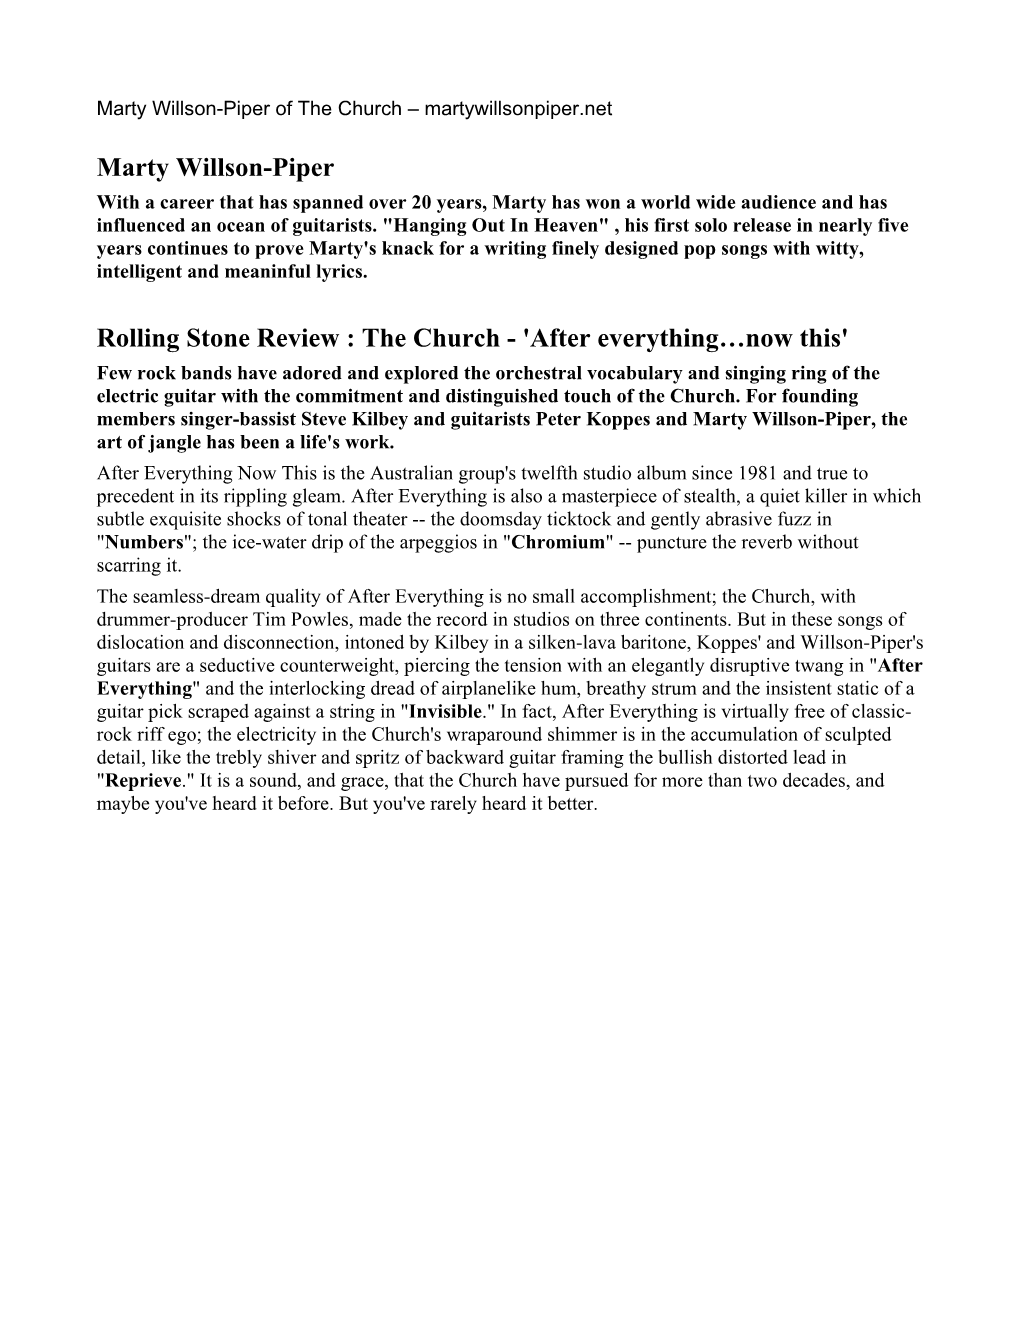 Marty Willson-Piper Rolling Stone Review